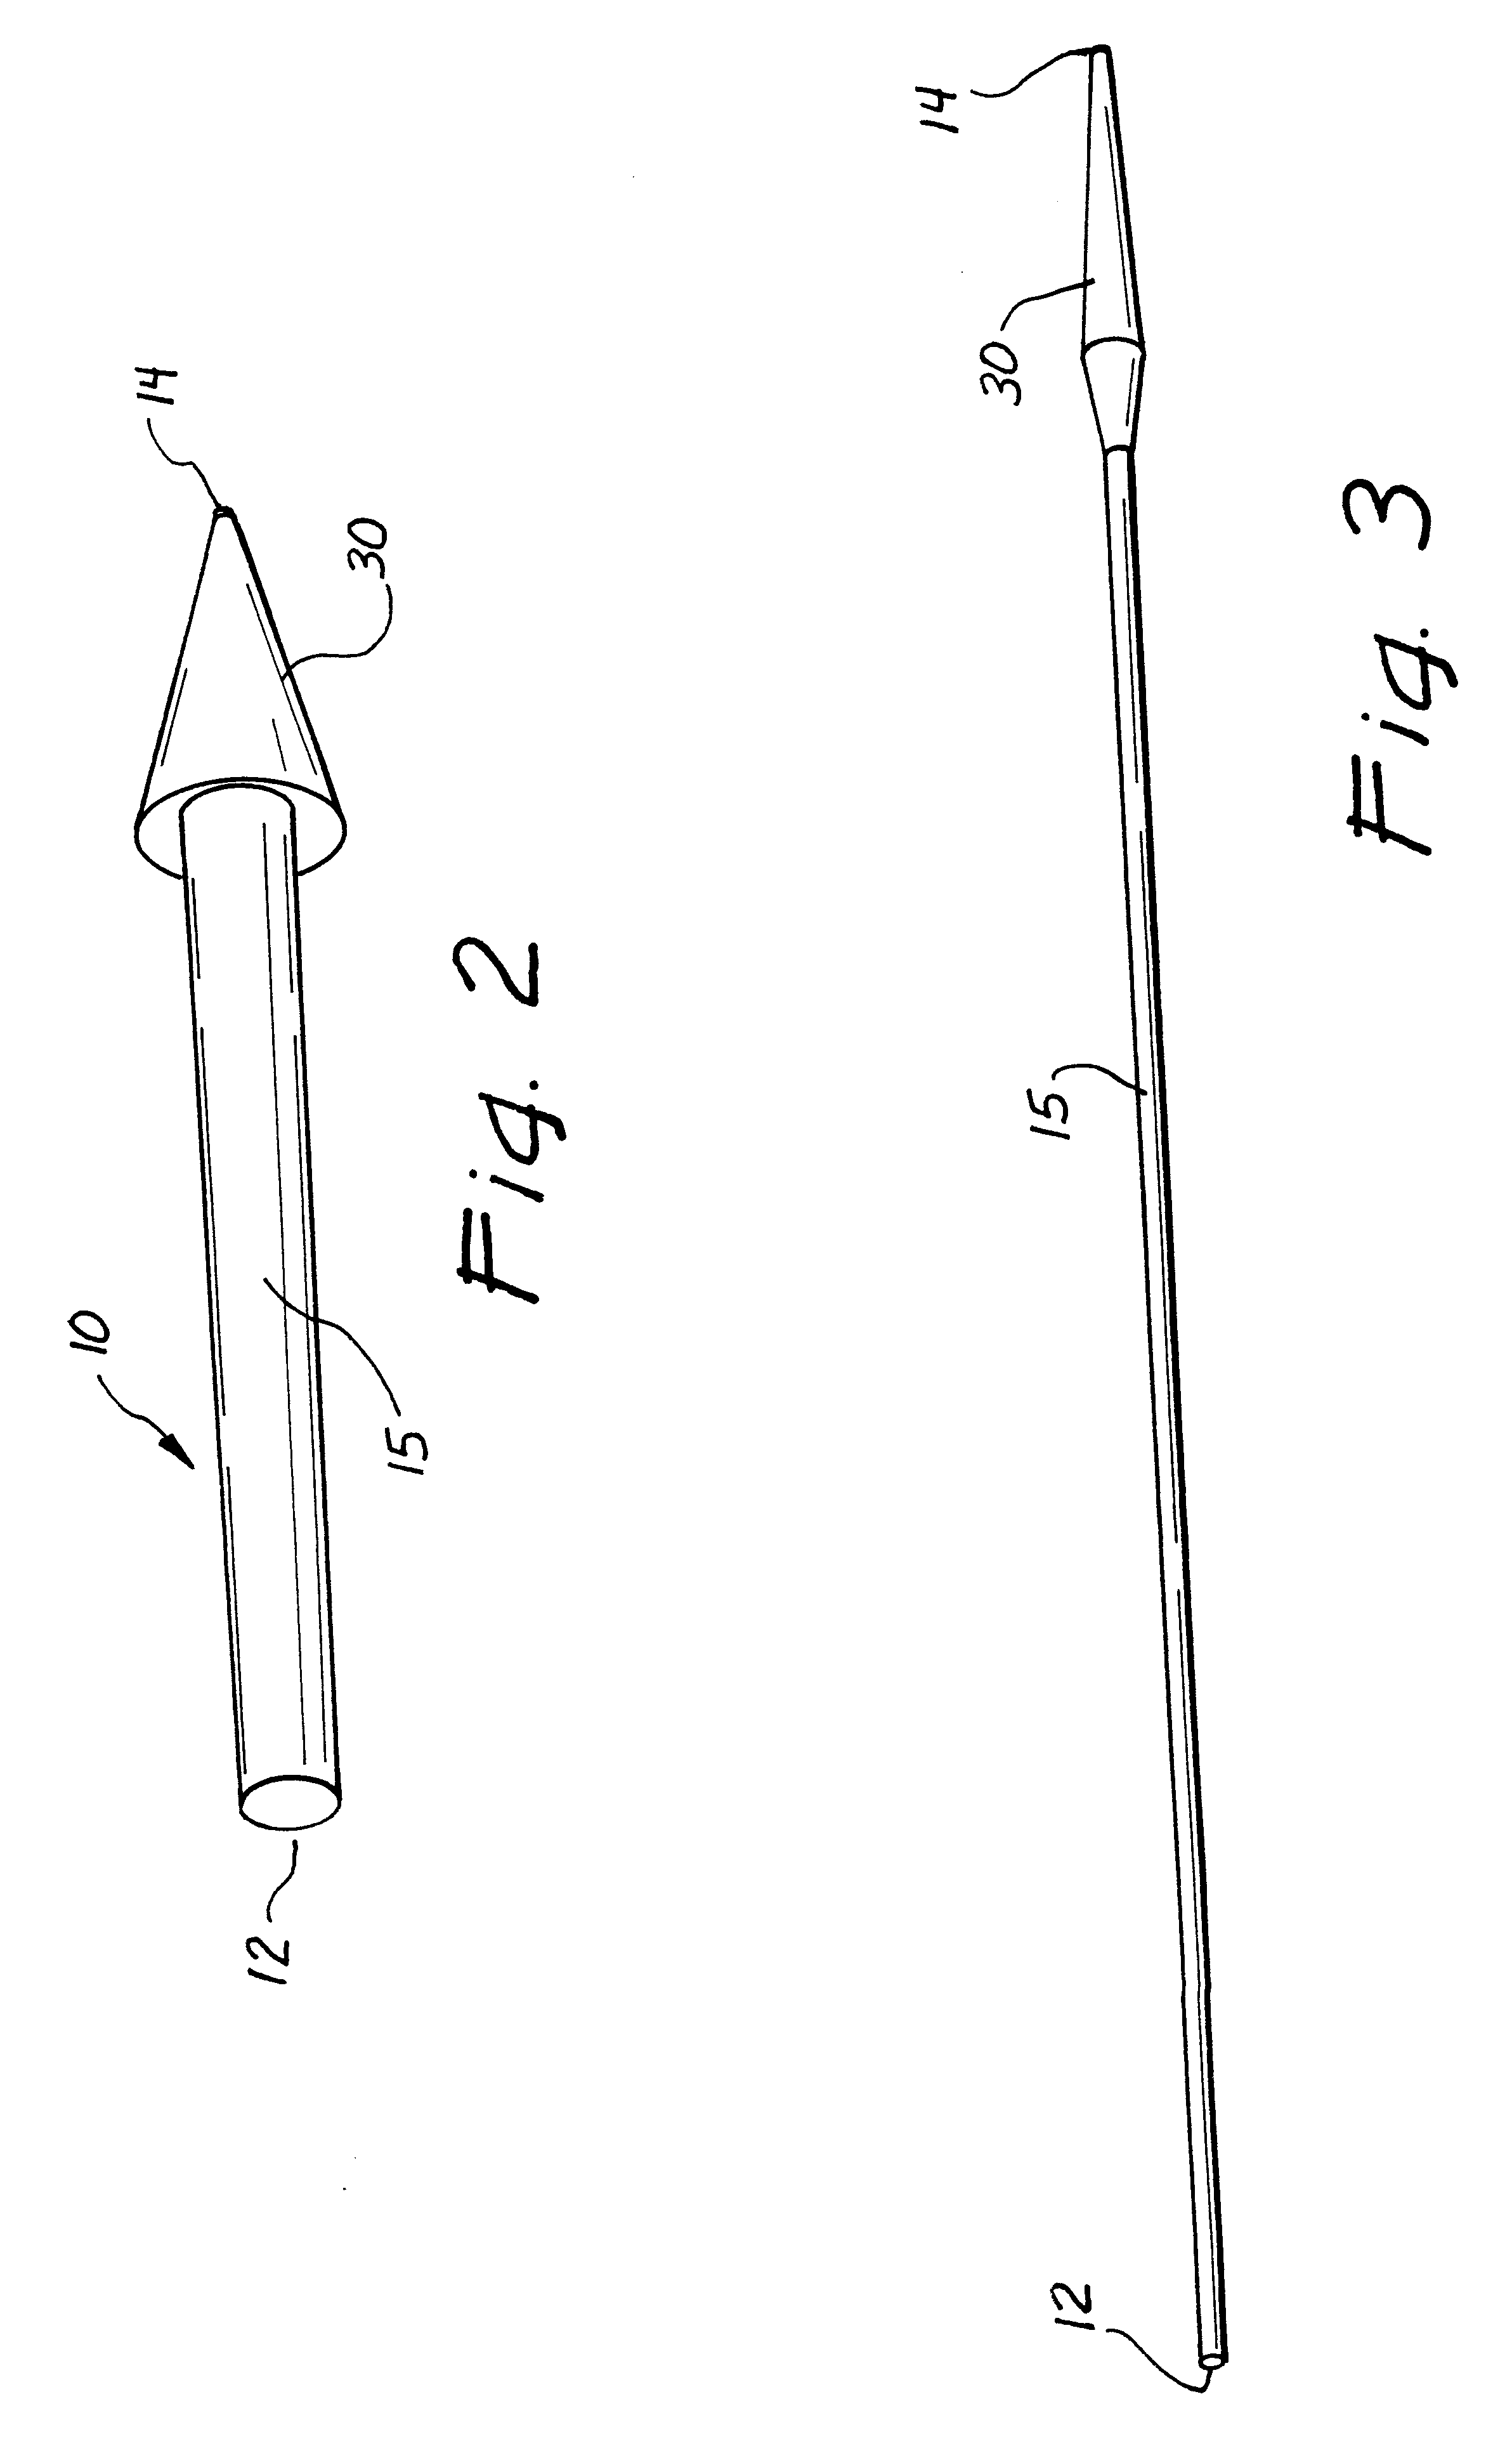 Ureteral stent system apparatus and method